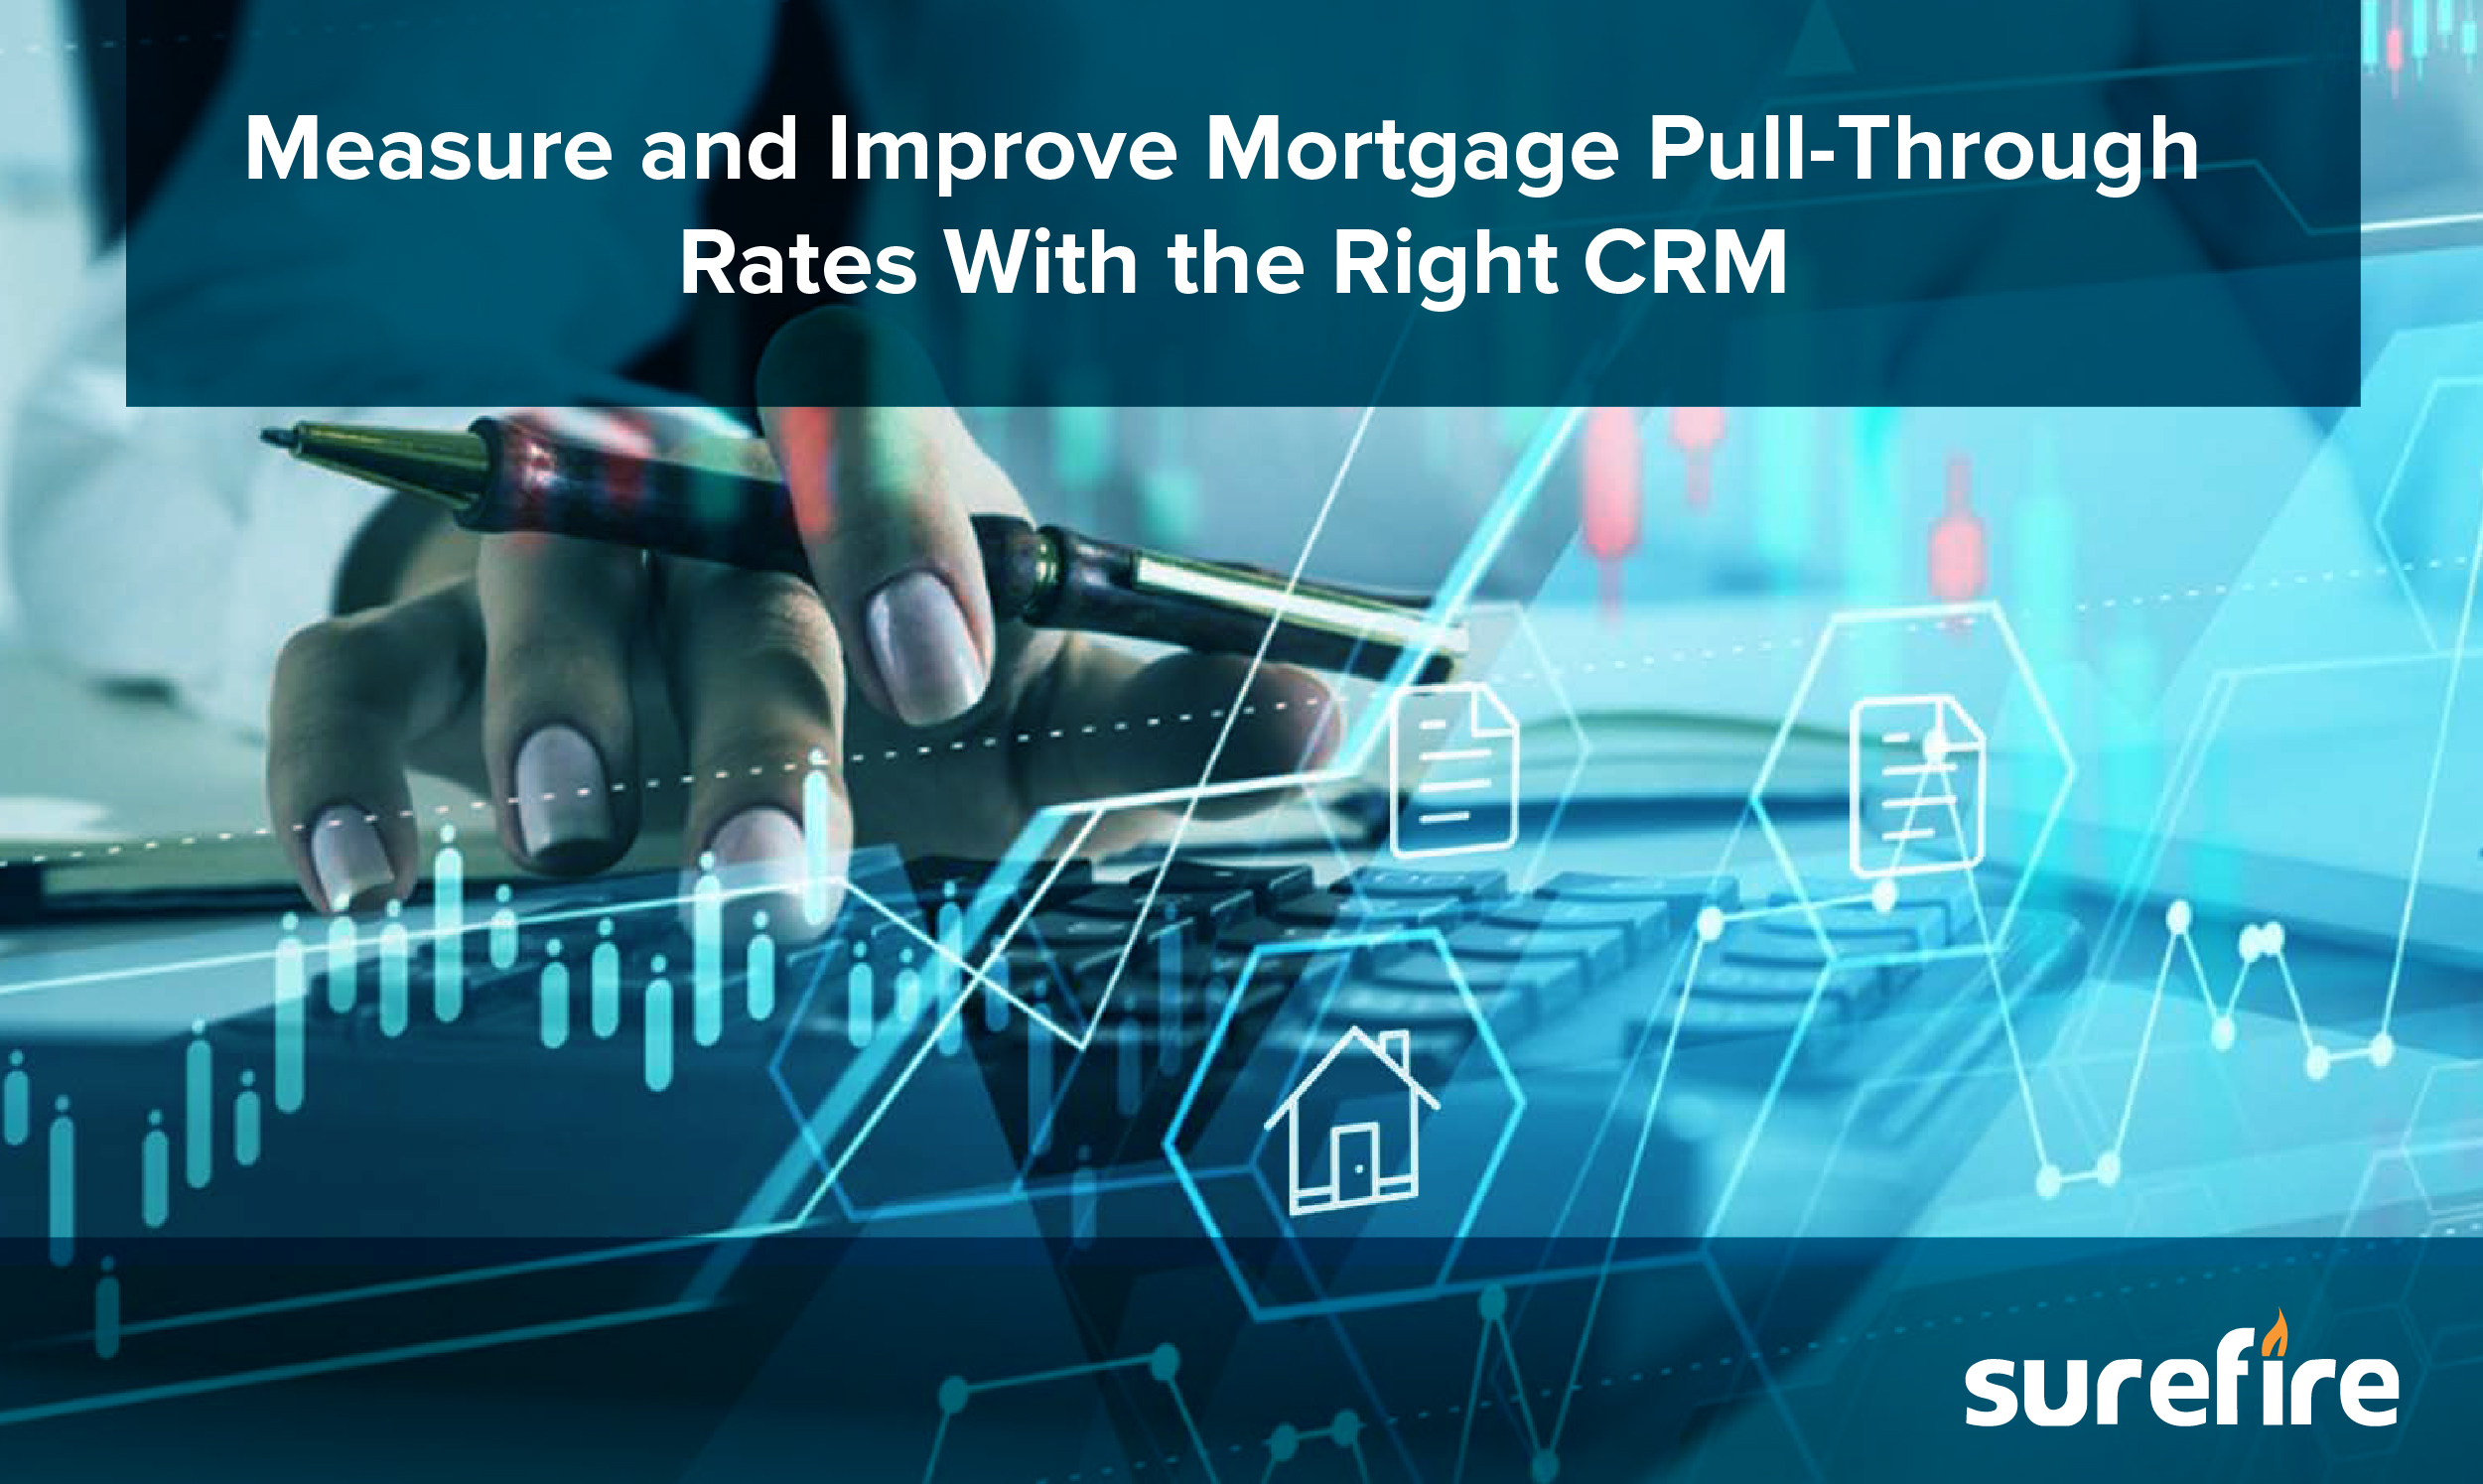 Mortgage Pull Through Rate optimized with Surefire CRM